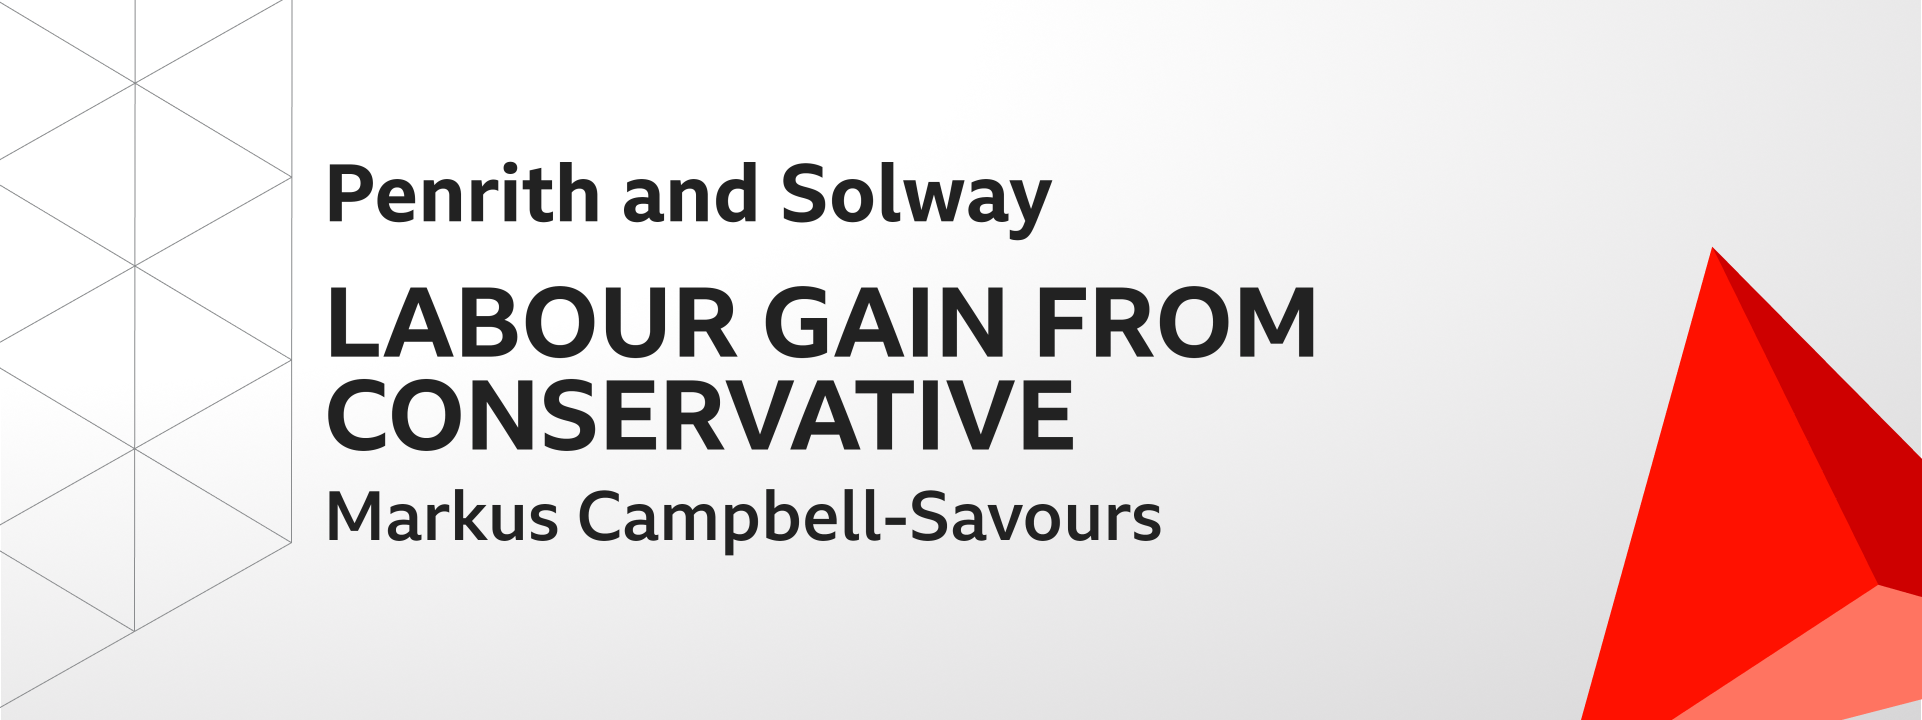 Graphic showing Labour gains Penrith and Solway from the Conservatives. The winning candidate was Markus Campbell-Savours.